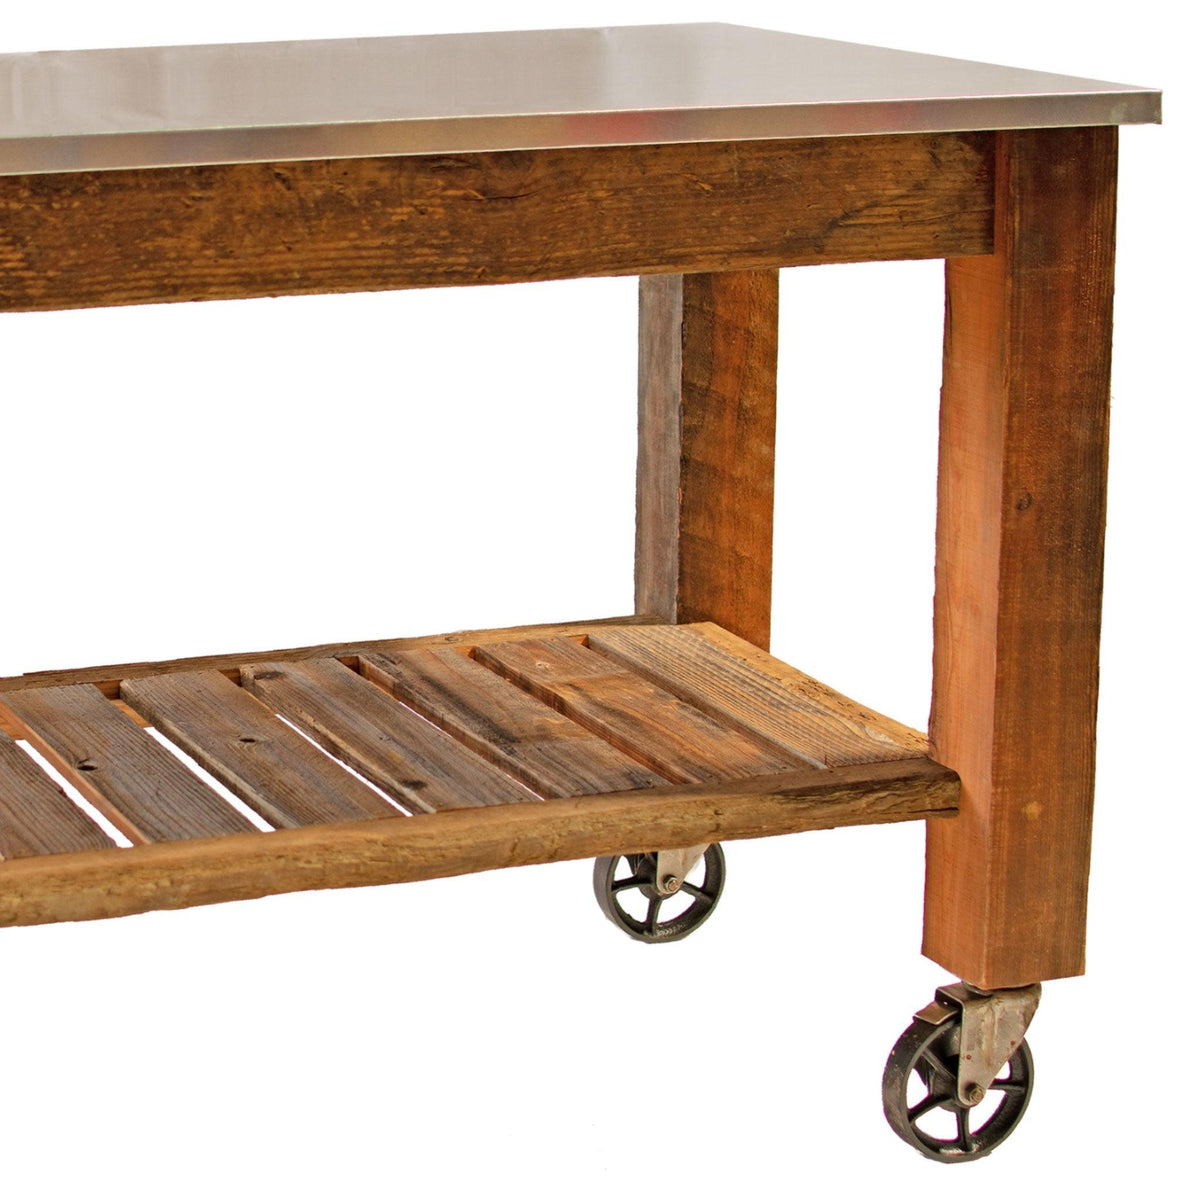 Side photo of Lee Display's Redwood Potting Table Rolling Cart with 6in Vintage Casters without Hardware Included on sale now at leedisplay.com